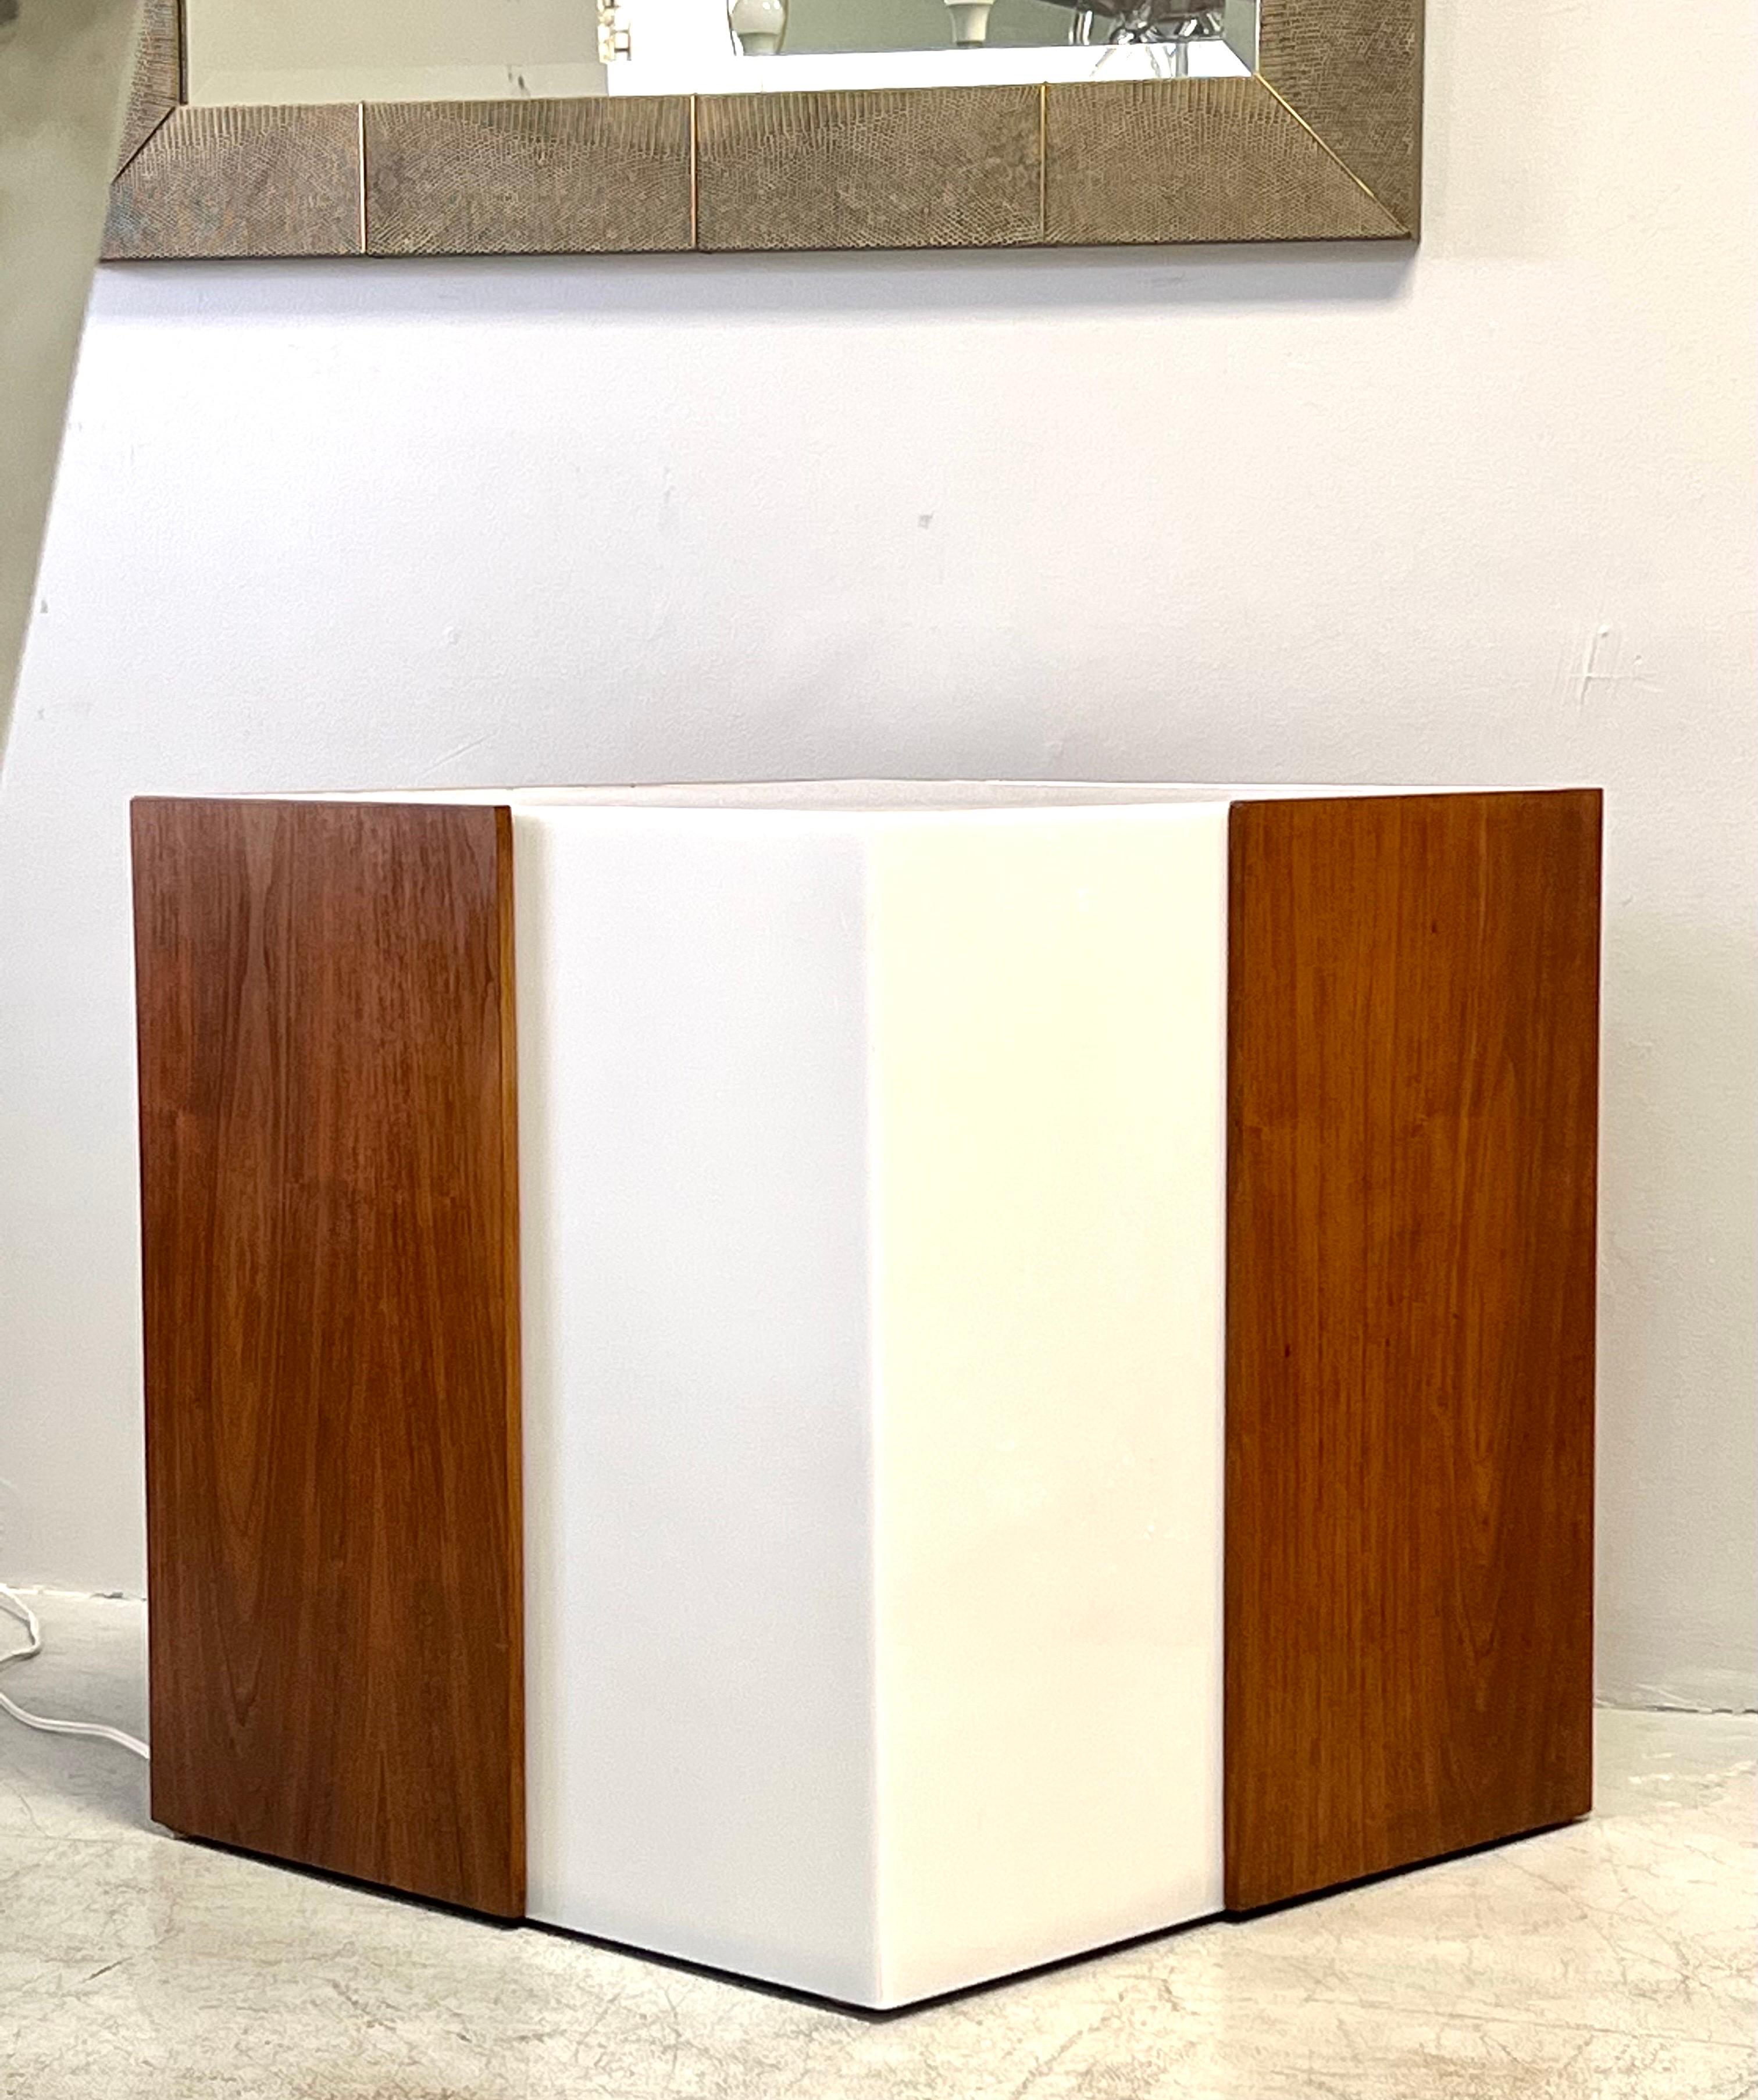 Vladimir Kagan Lightbox Cube Illuminated Walnut Table Stand In Good Condition For Sale In Miami, FL